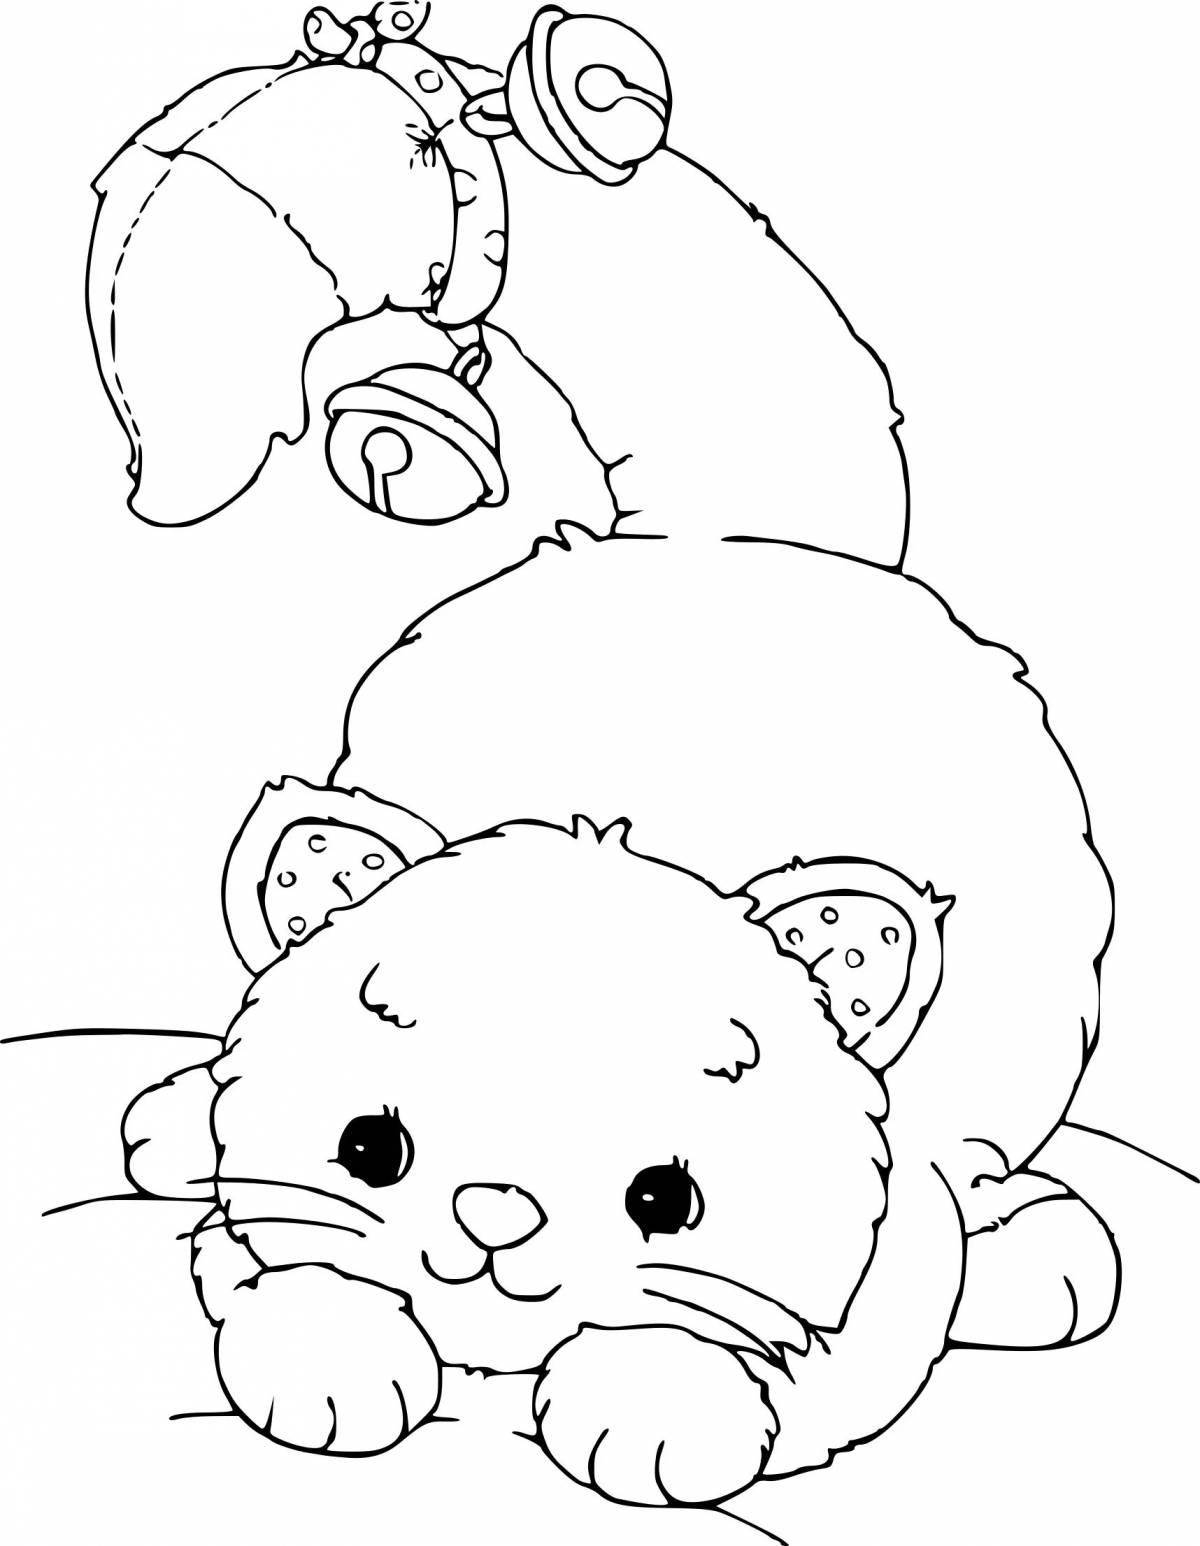 Exciting cat toy coloring book